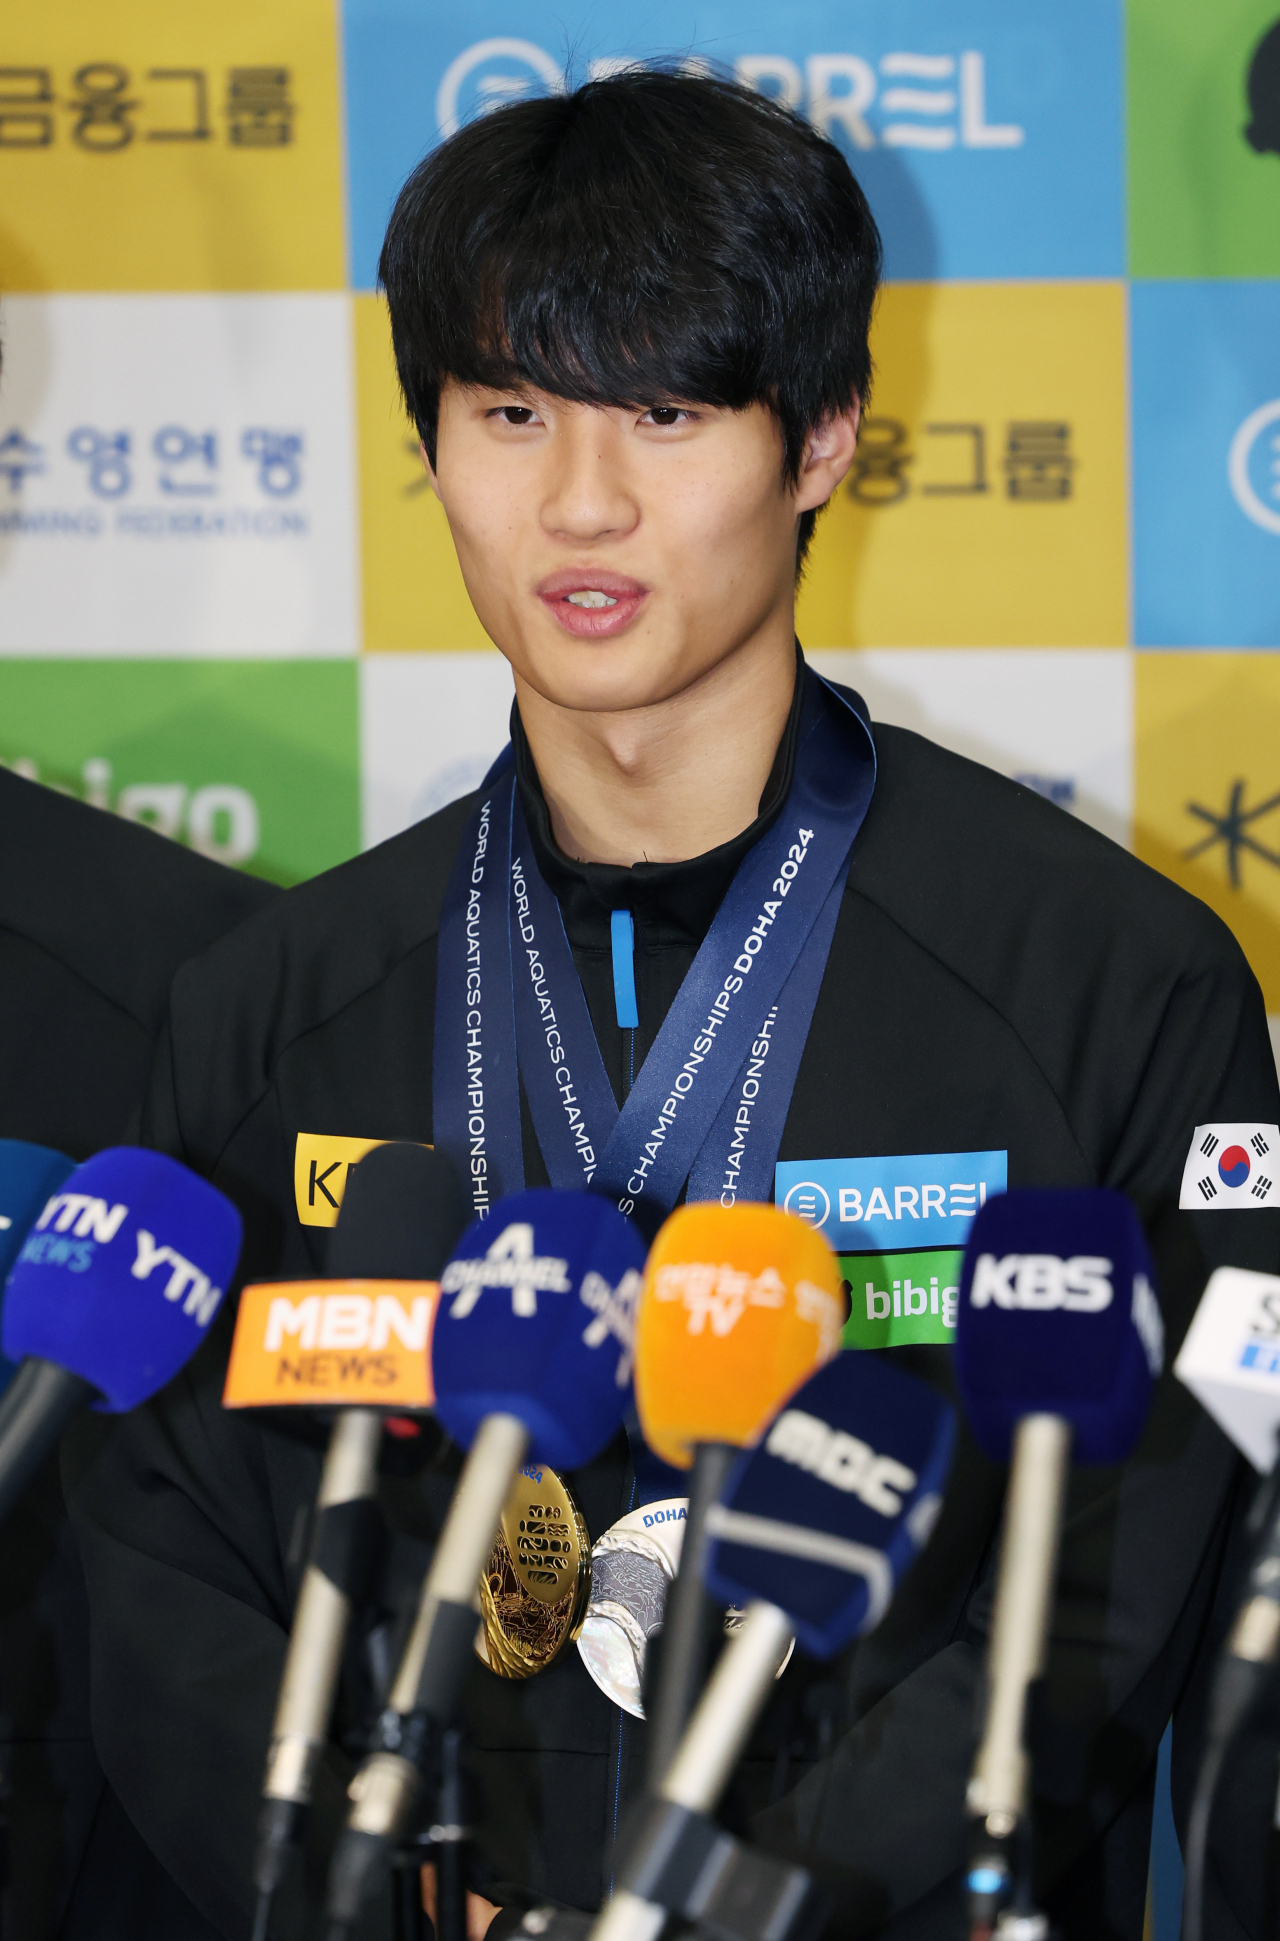 Hwang Sun-woo, who won the gold medal in the men's 200-meter freestyle title at the just-ended World Aquatics Championships in Doha, speaks with he press upon returning home via Incheon International Airport, west of Seoul, Monday. (Yonhap)